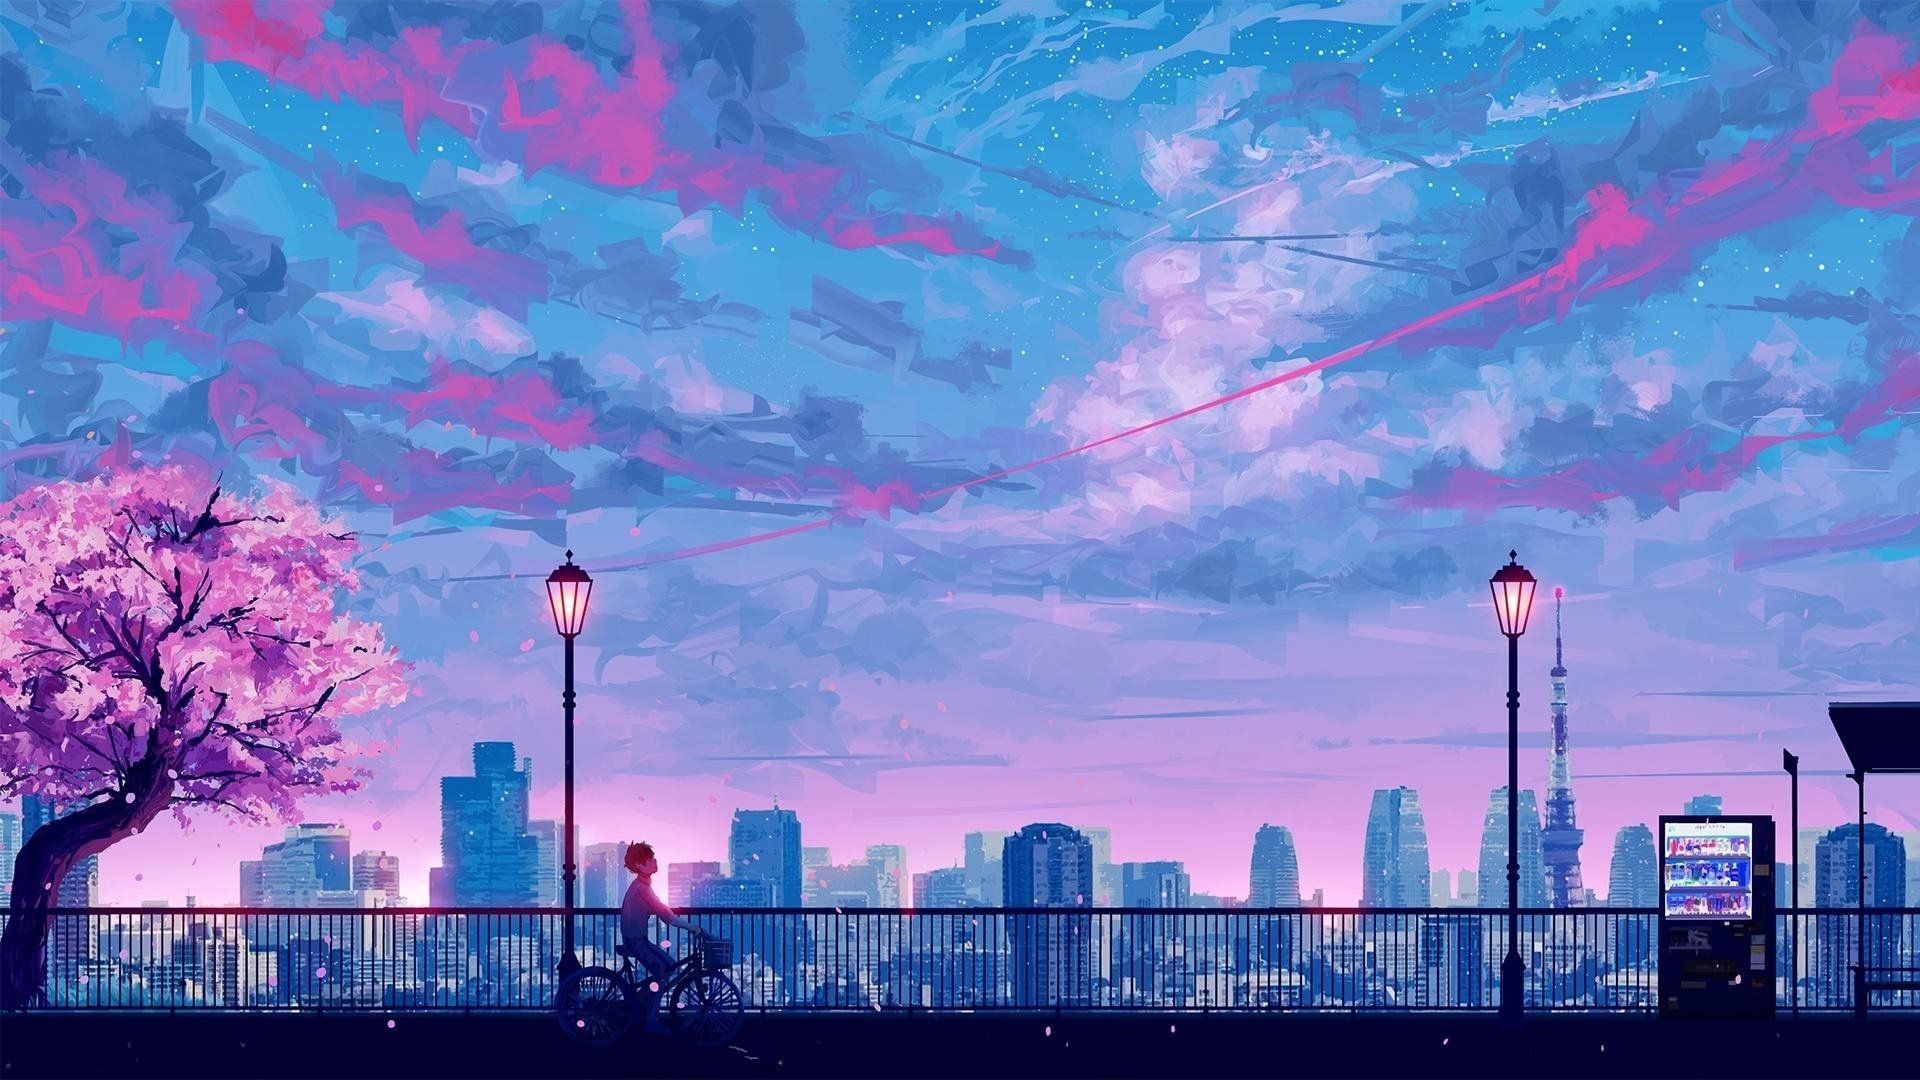 A painting of the city skyline with pink clouds - Anime city, city